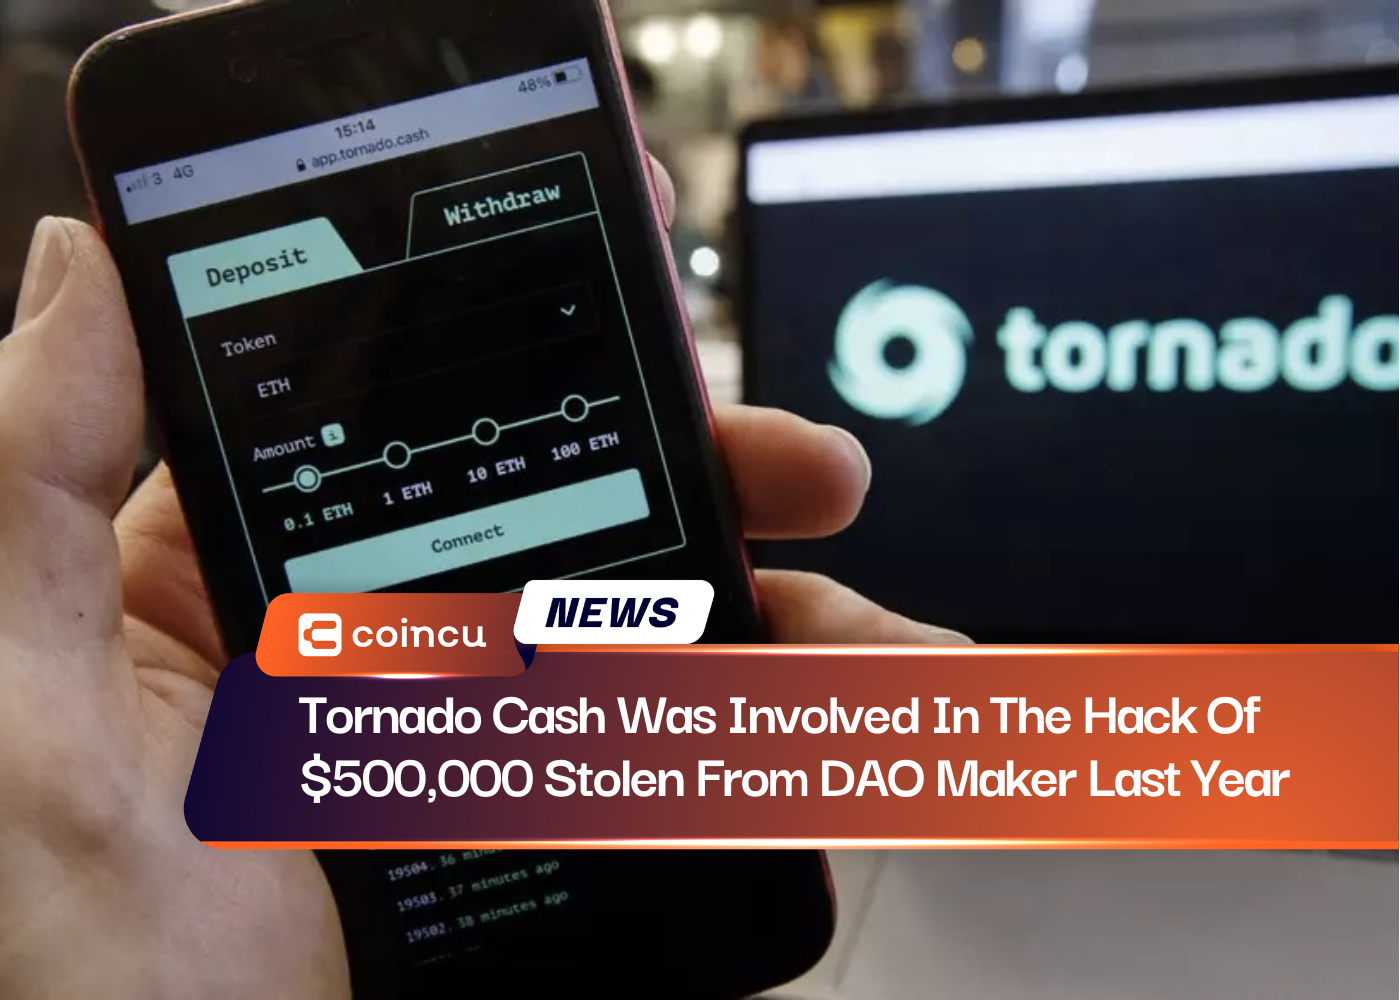 Tornado Cash Was Involved In The Hack Of $500,000 Stolen From DAO Maker Last Year